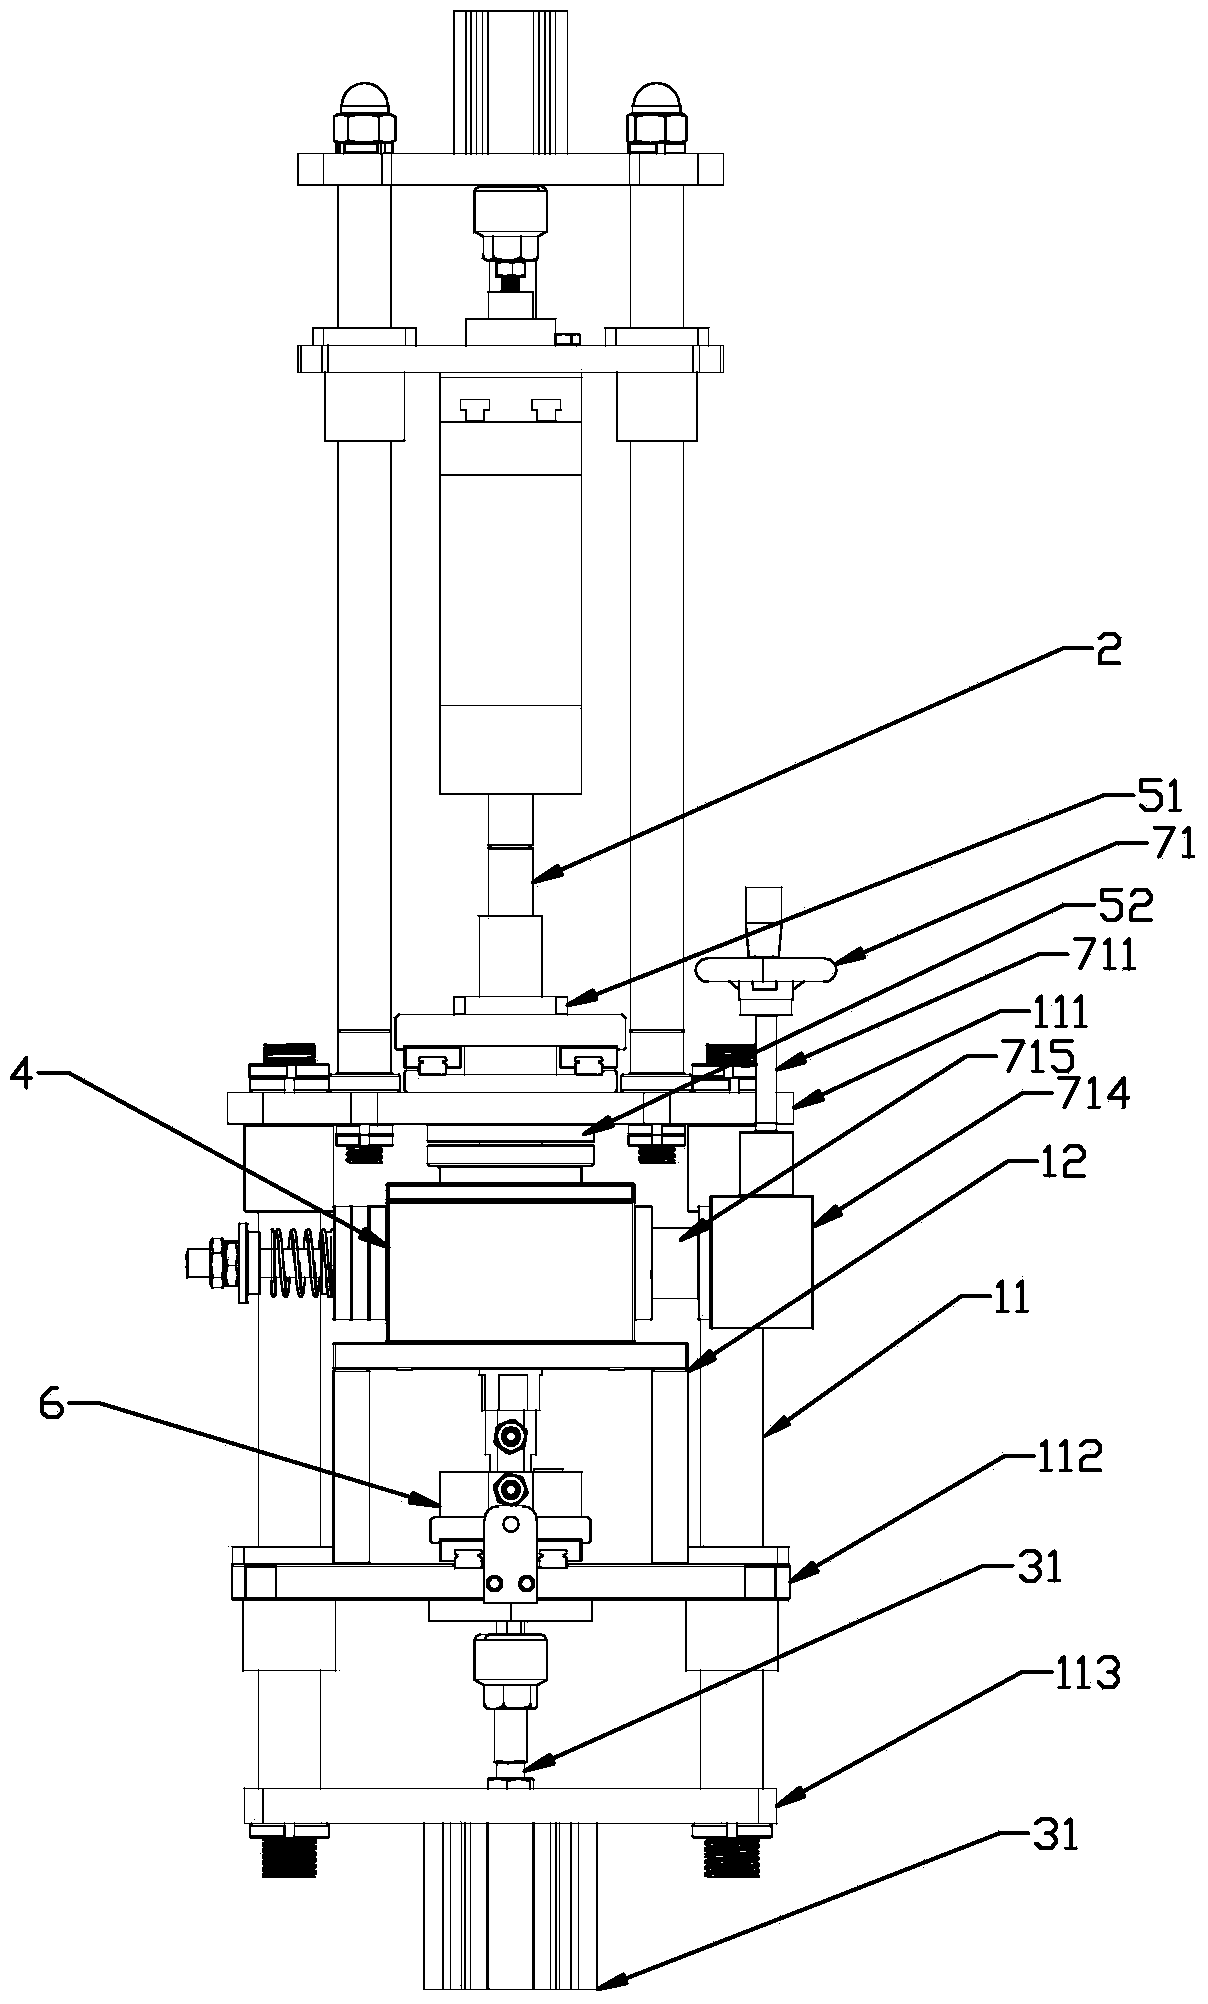 Welding mechanism with lifting device